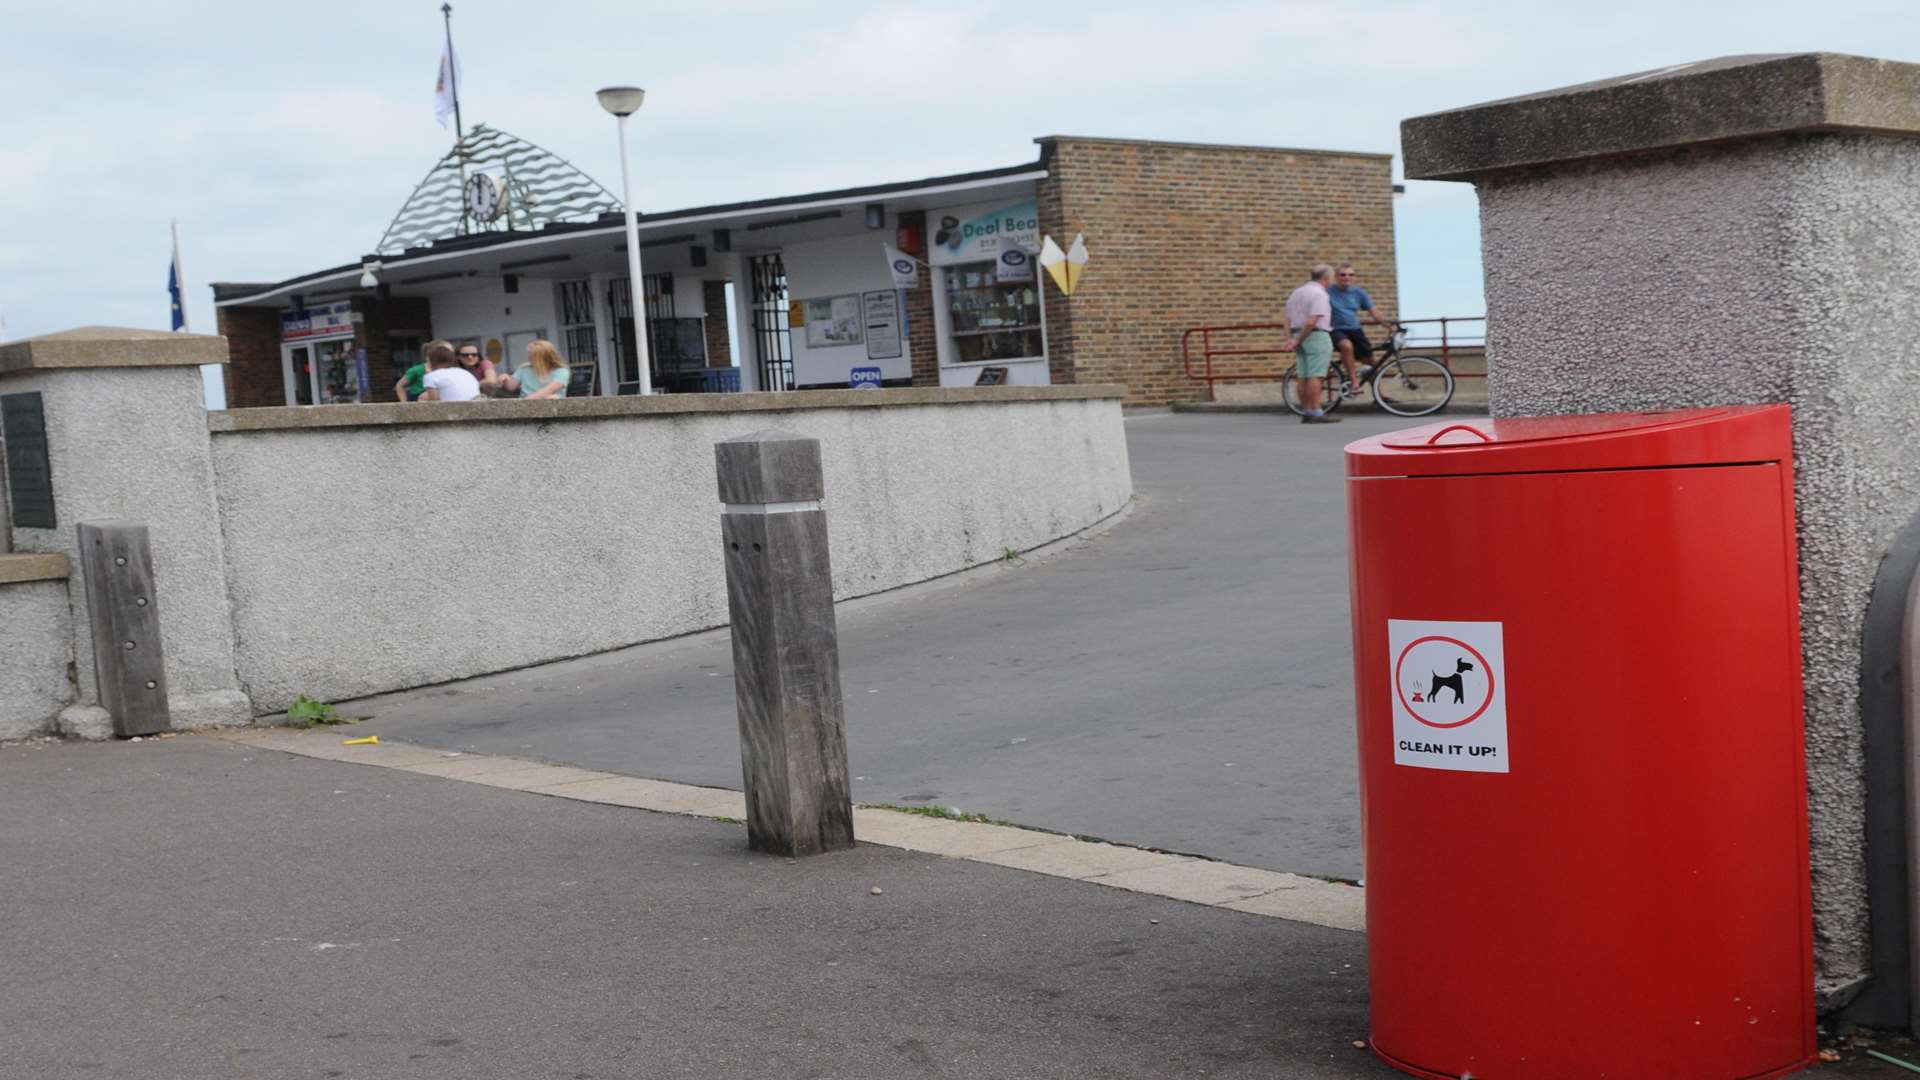 The newly installed dog bin at the entrance of the pier